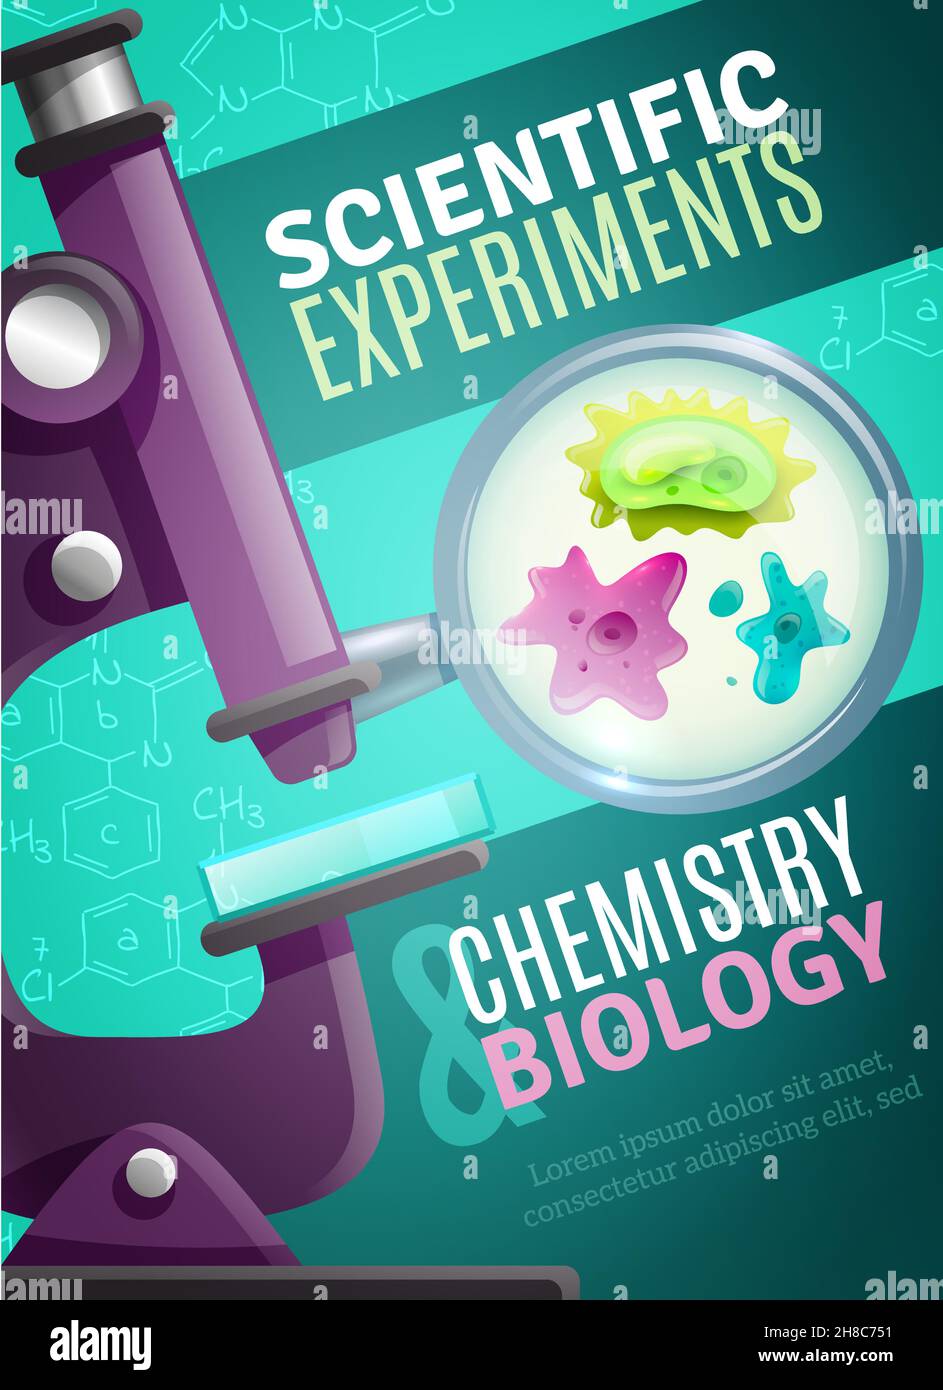 Scientific chemistry and biology experiments poster with unicellular organisms under magnifying glass of microscope images vector illustration Stock Vector